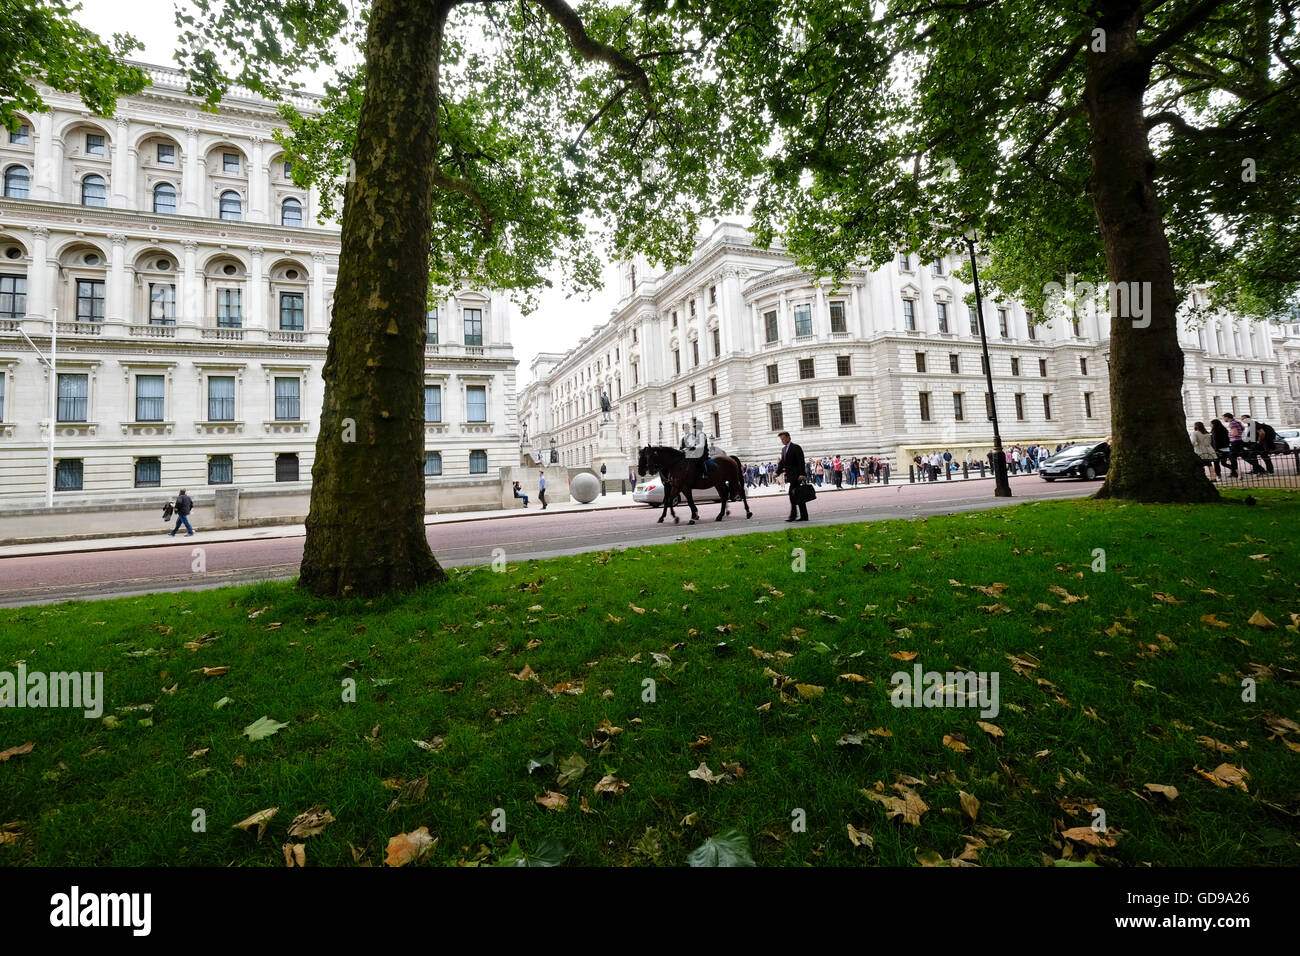 Police on horseback patrol past The Imperial War museum viewed from St James's Park Stock Photo